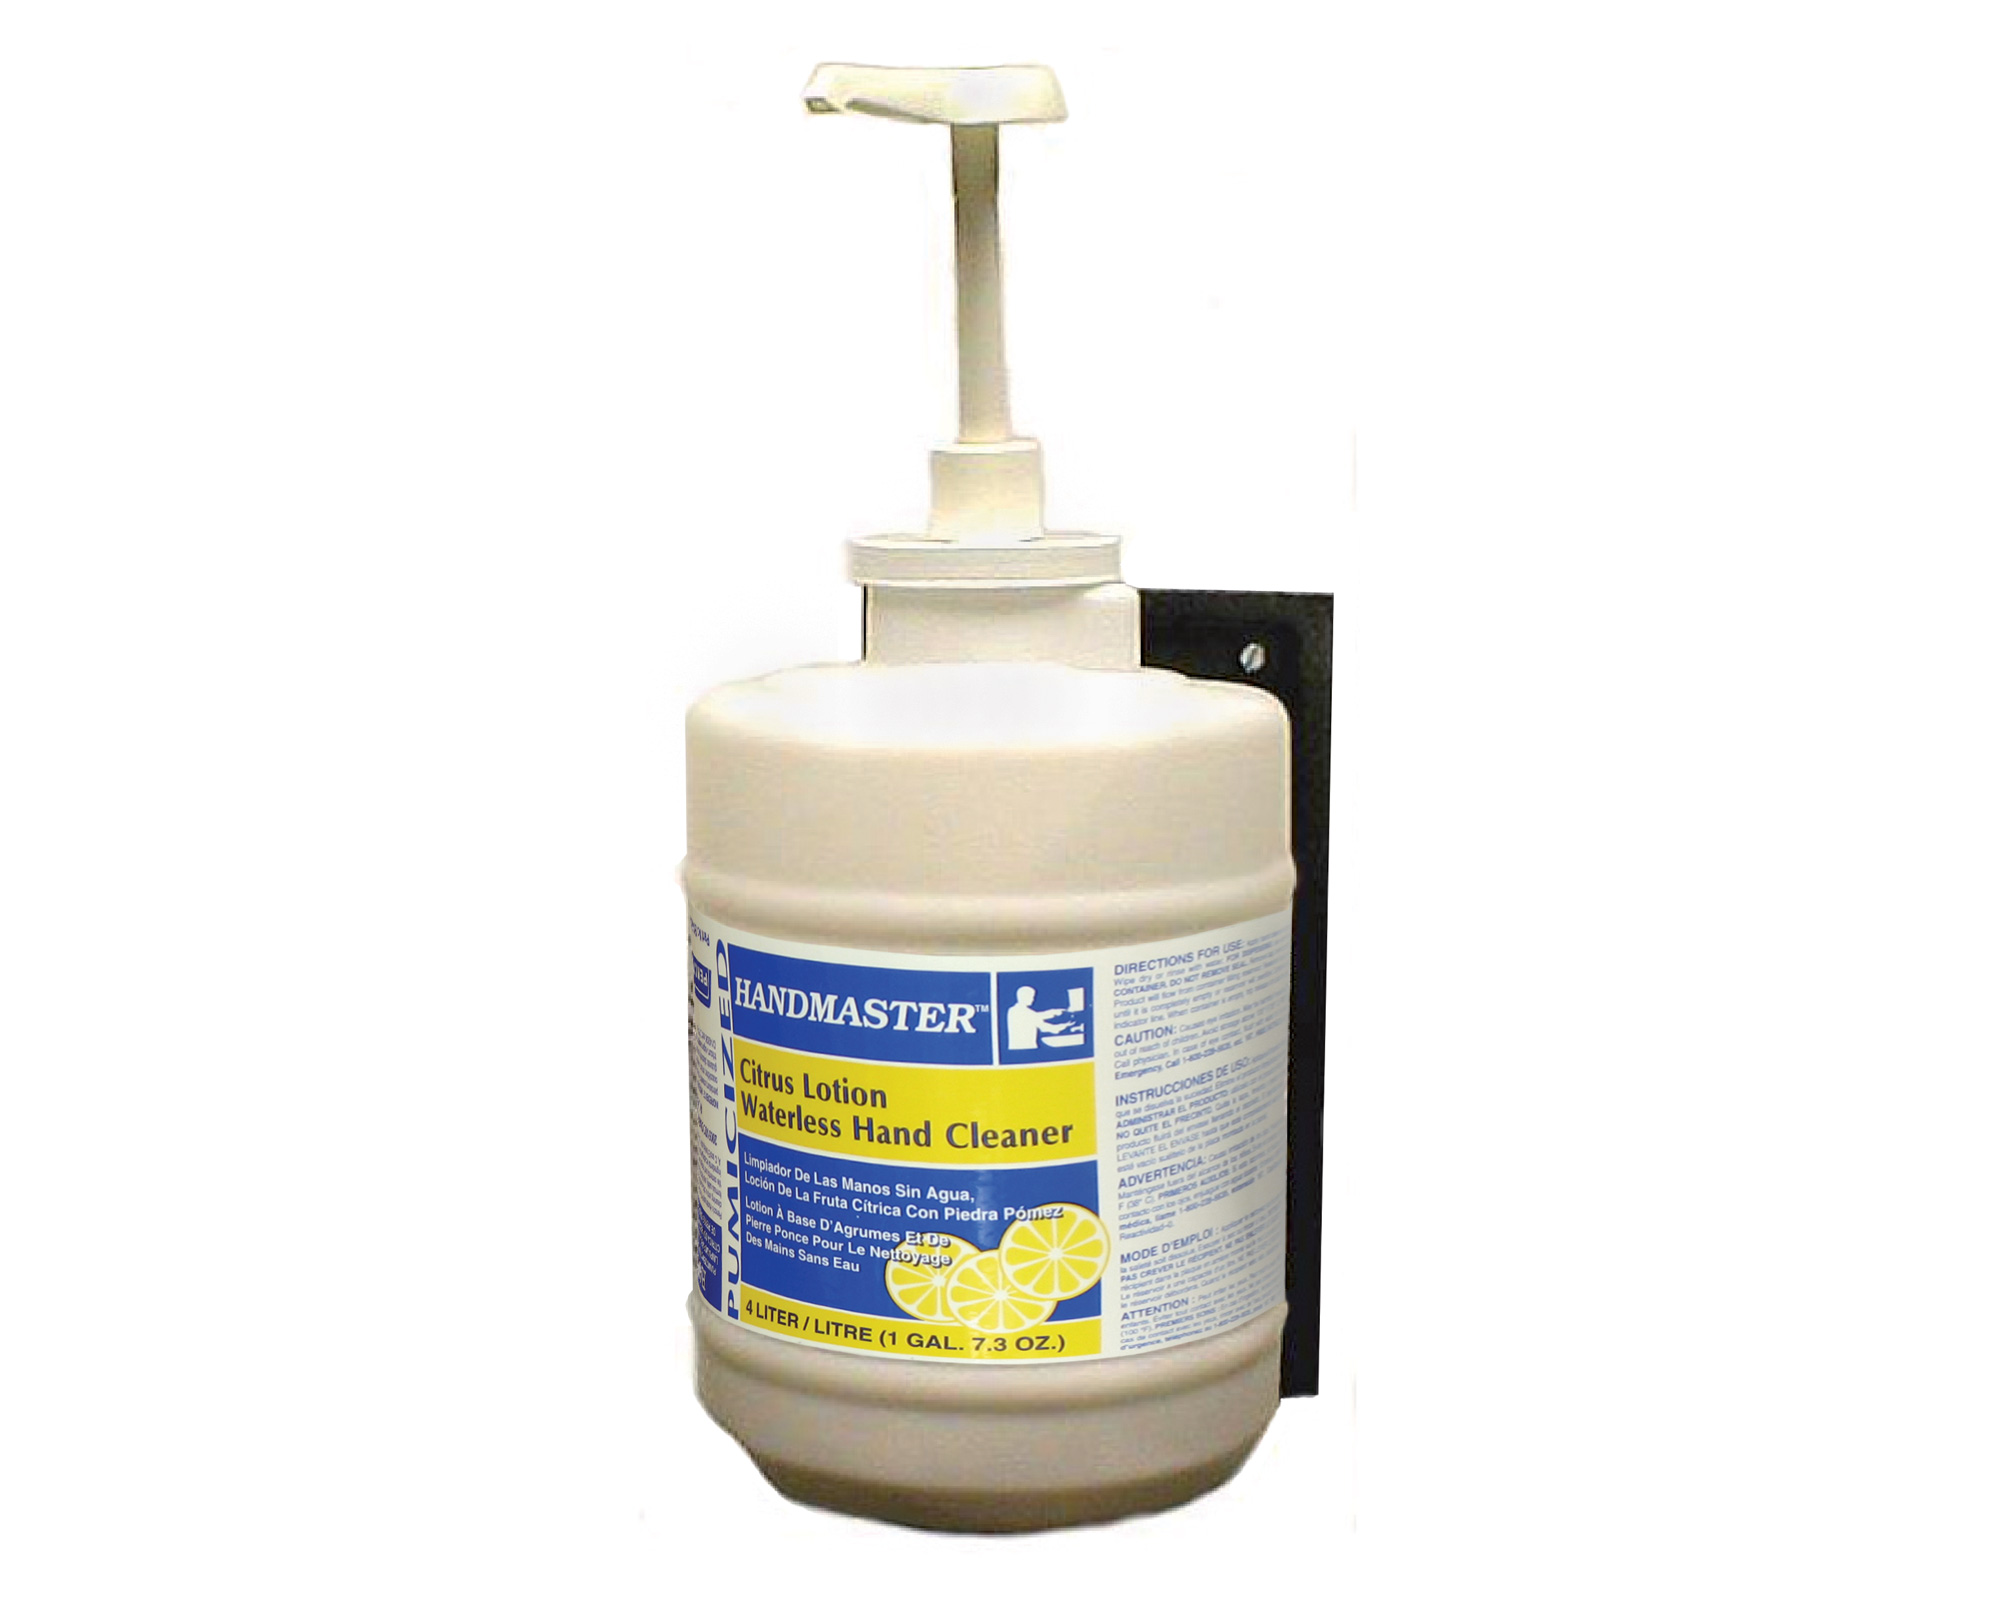 Pumicized Waterless Grit Hand Cleaner/Dispensers